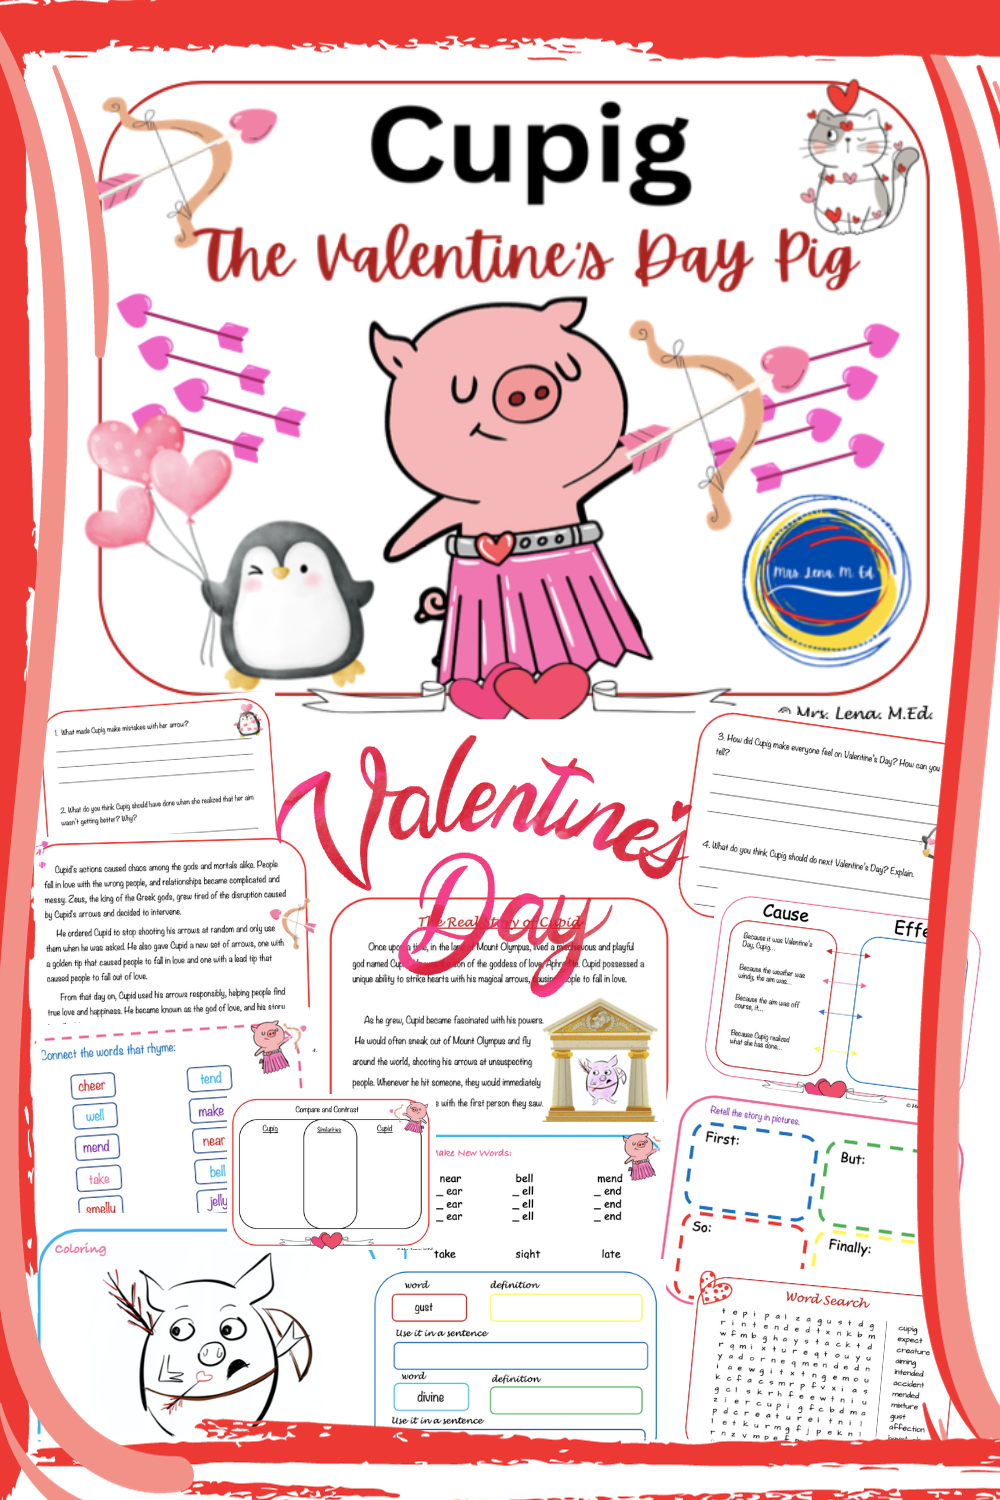 Cupig The Valentine's Day Pig by Tattersfield Lesson Plan New Picture Book